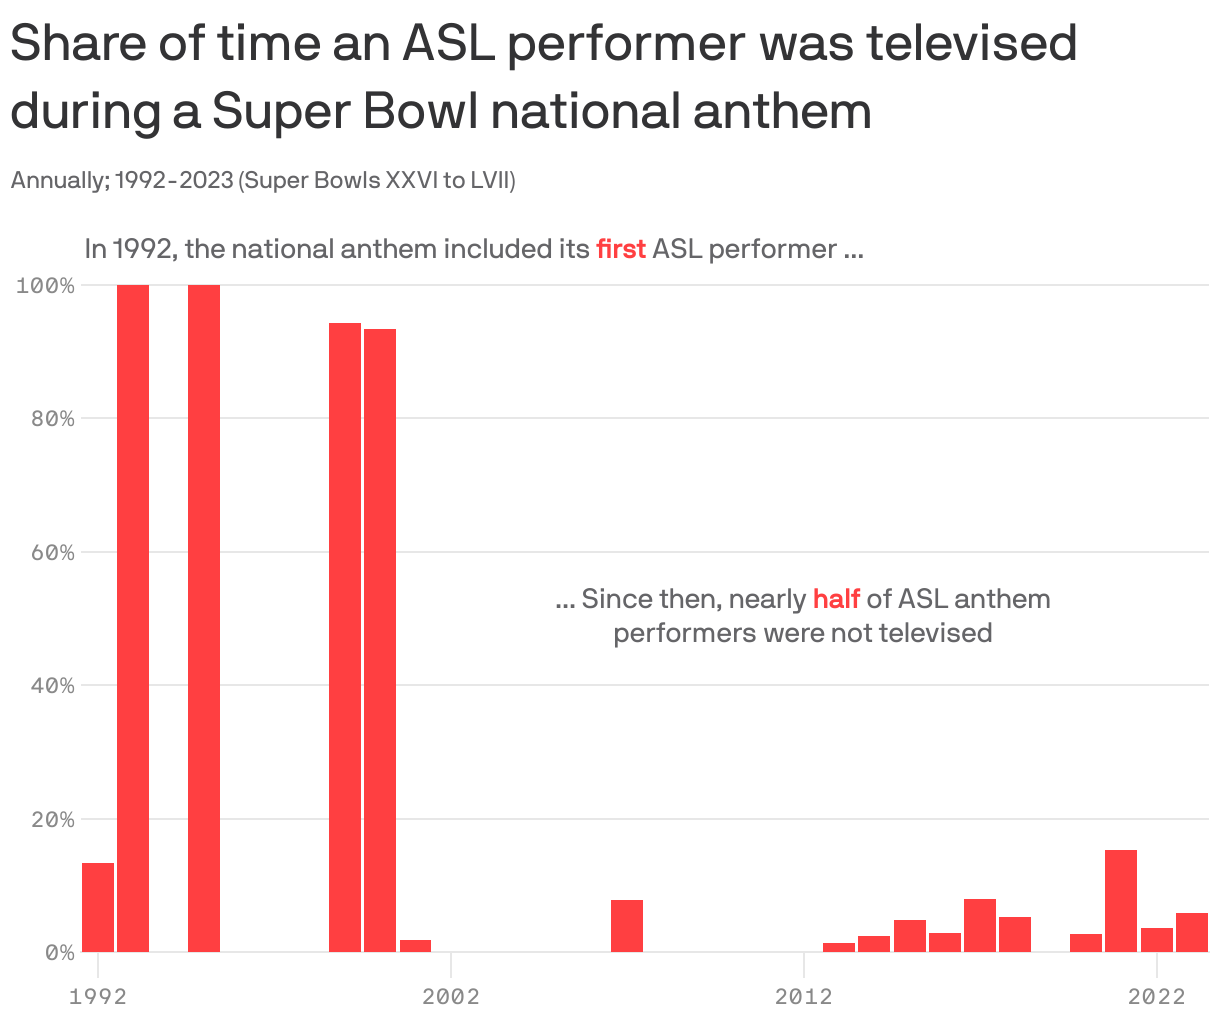 Share of time an ASL performer was televised during  a Super Bowl national anthem